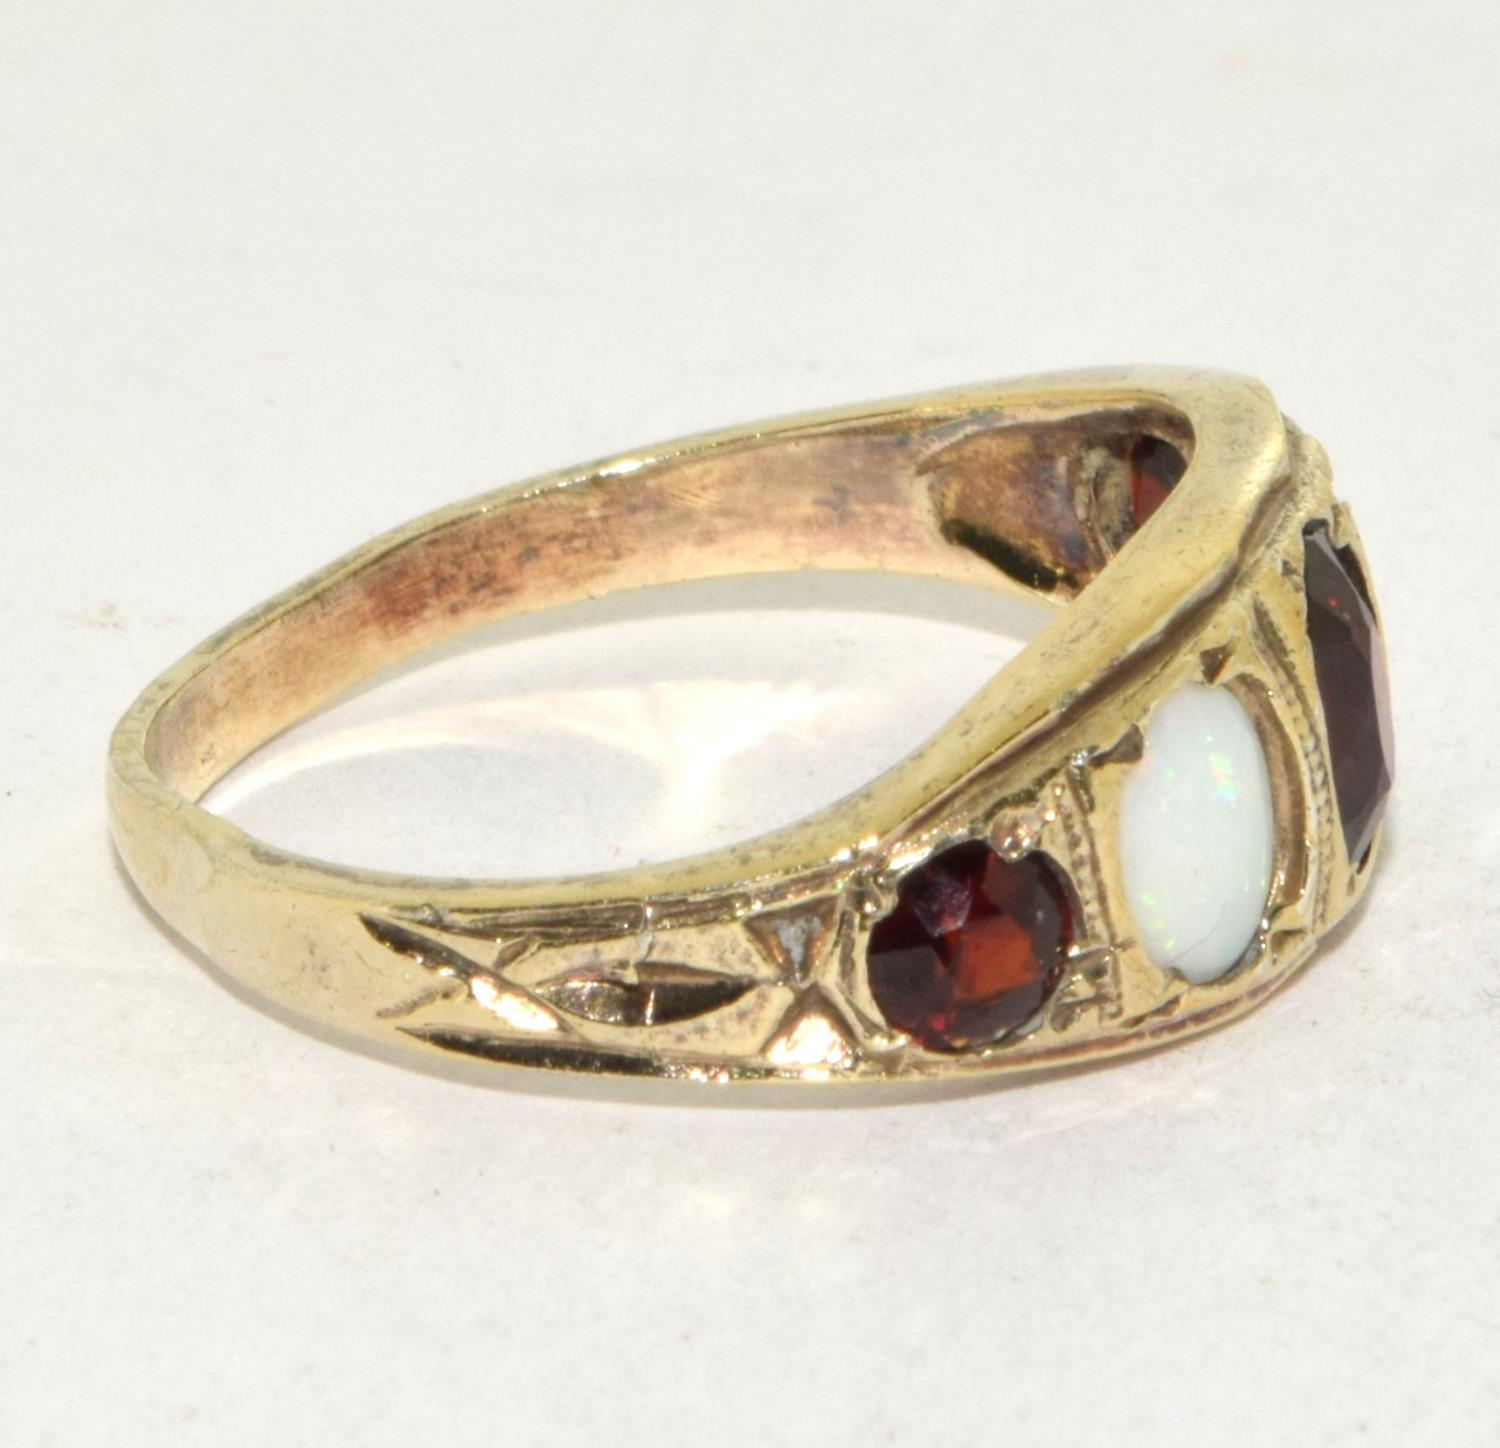 Vintage 9ct gold Opal and Garnet 5 stone ring size O - Image 4 of 5